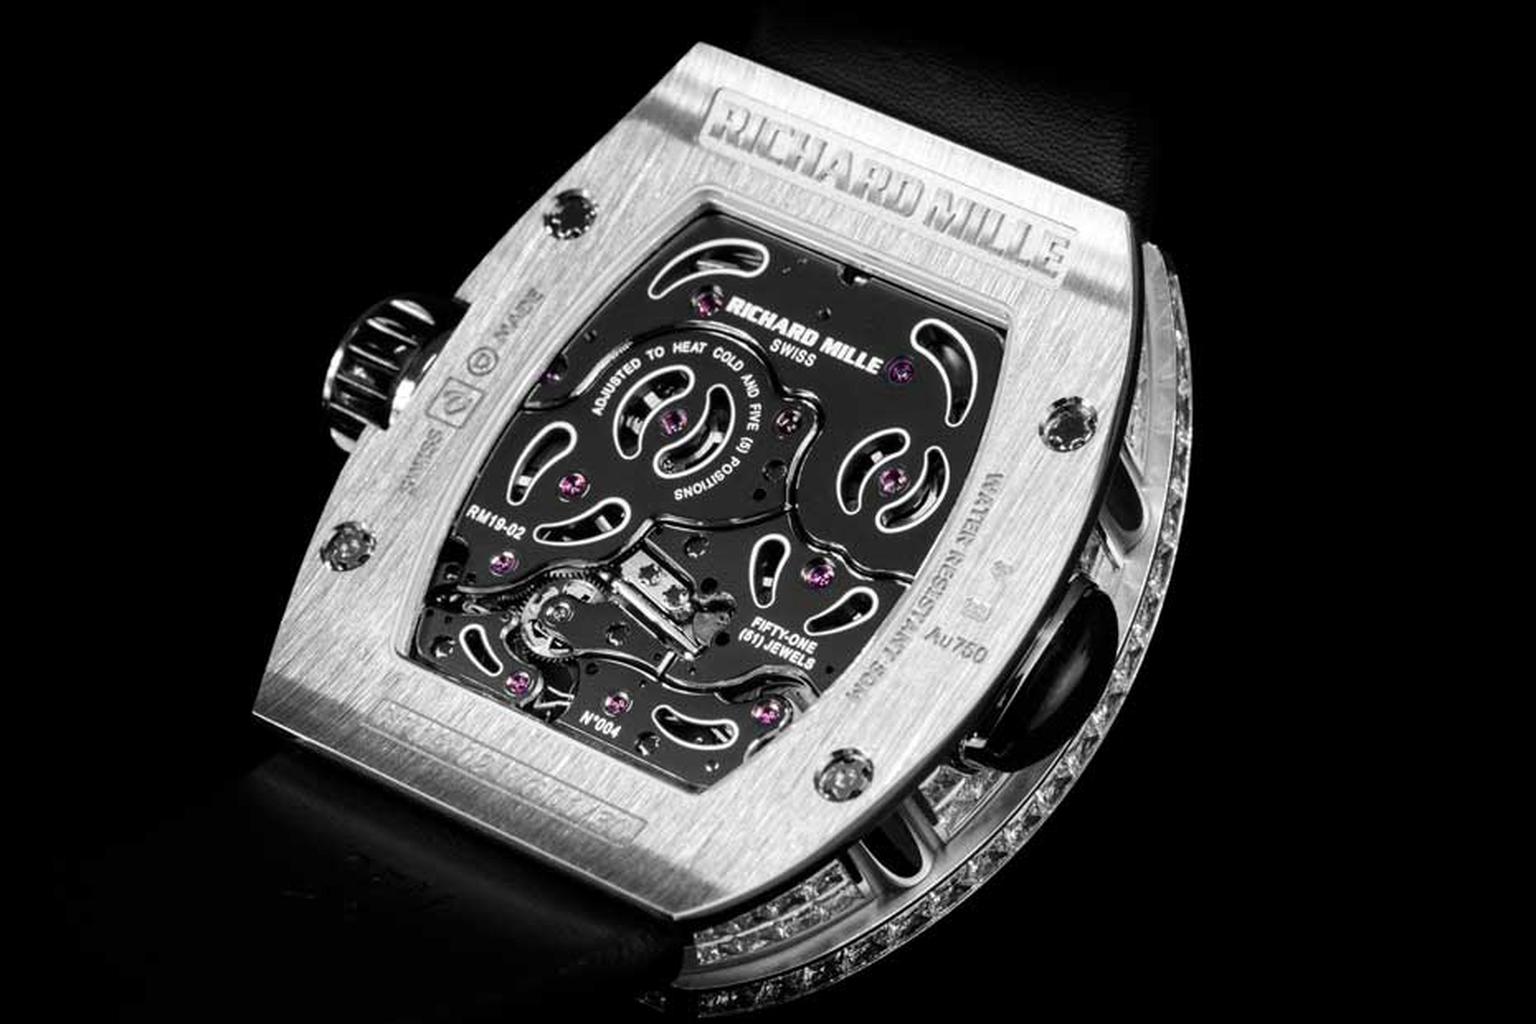 RM 19-02 Tourbillon Fleur, the new luxury ladies' watch from Richard Mille, has a tonneau-shaped case, made of three different layers.